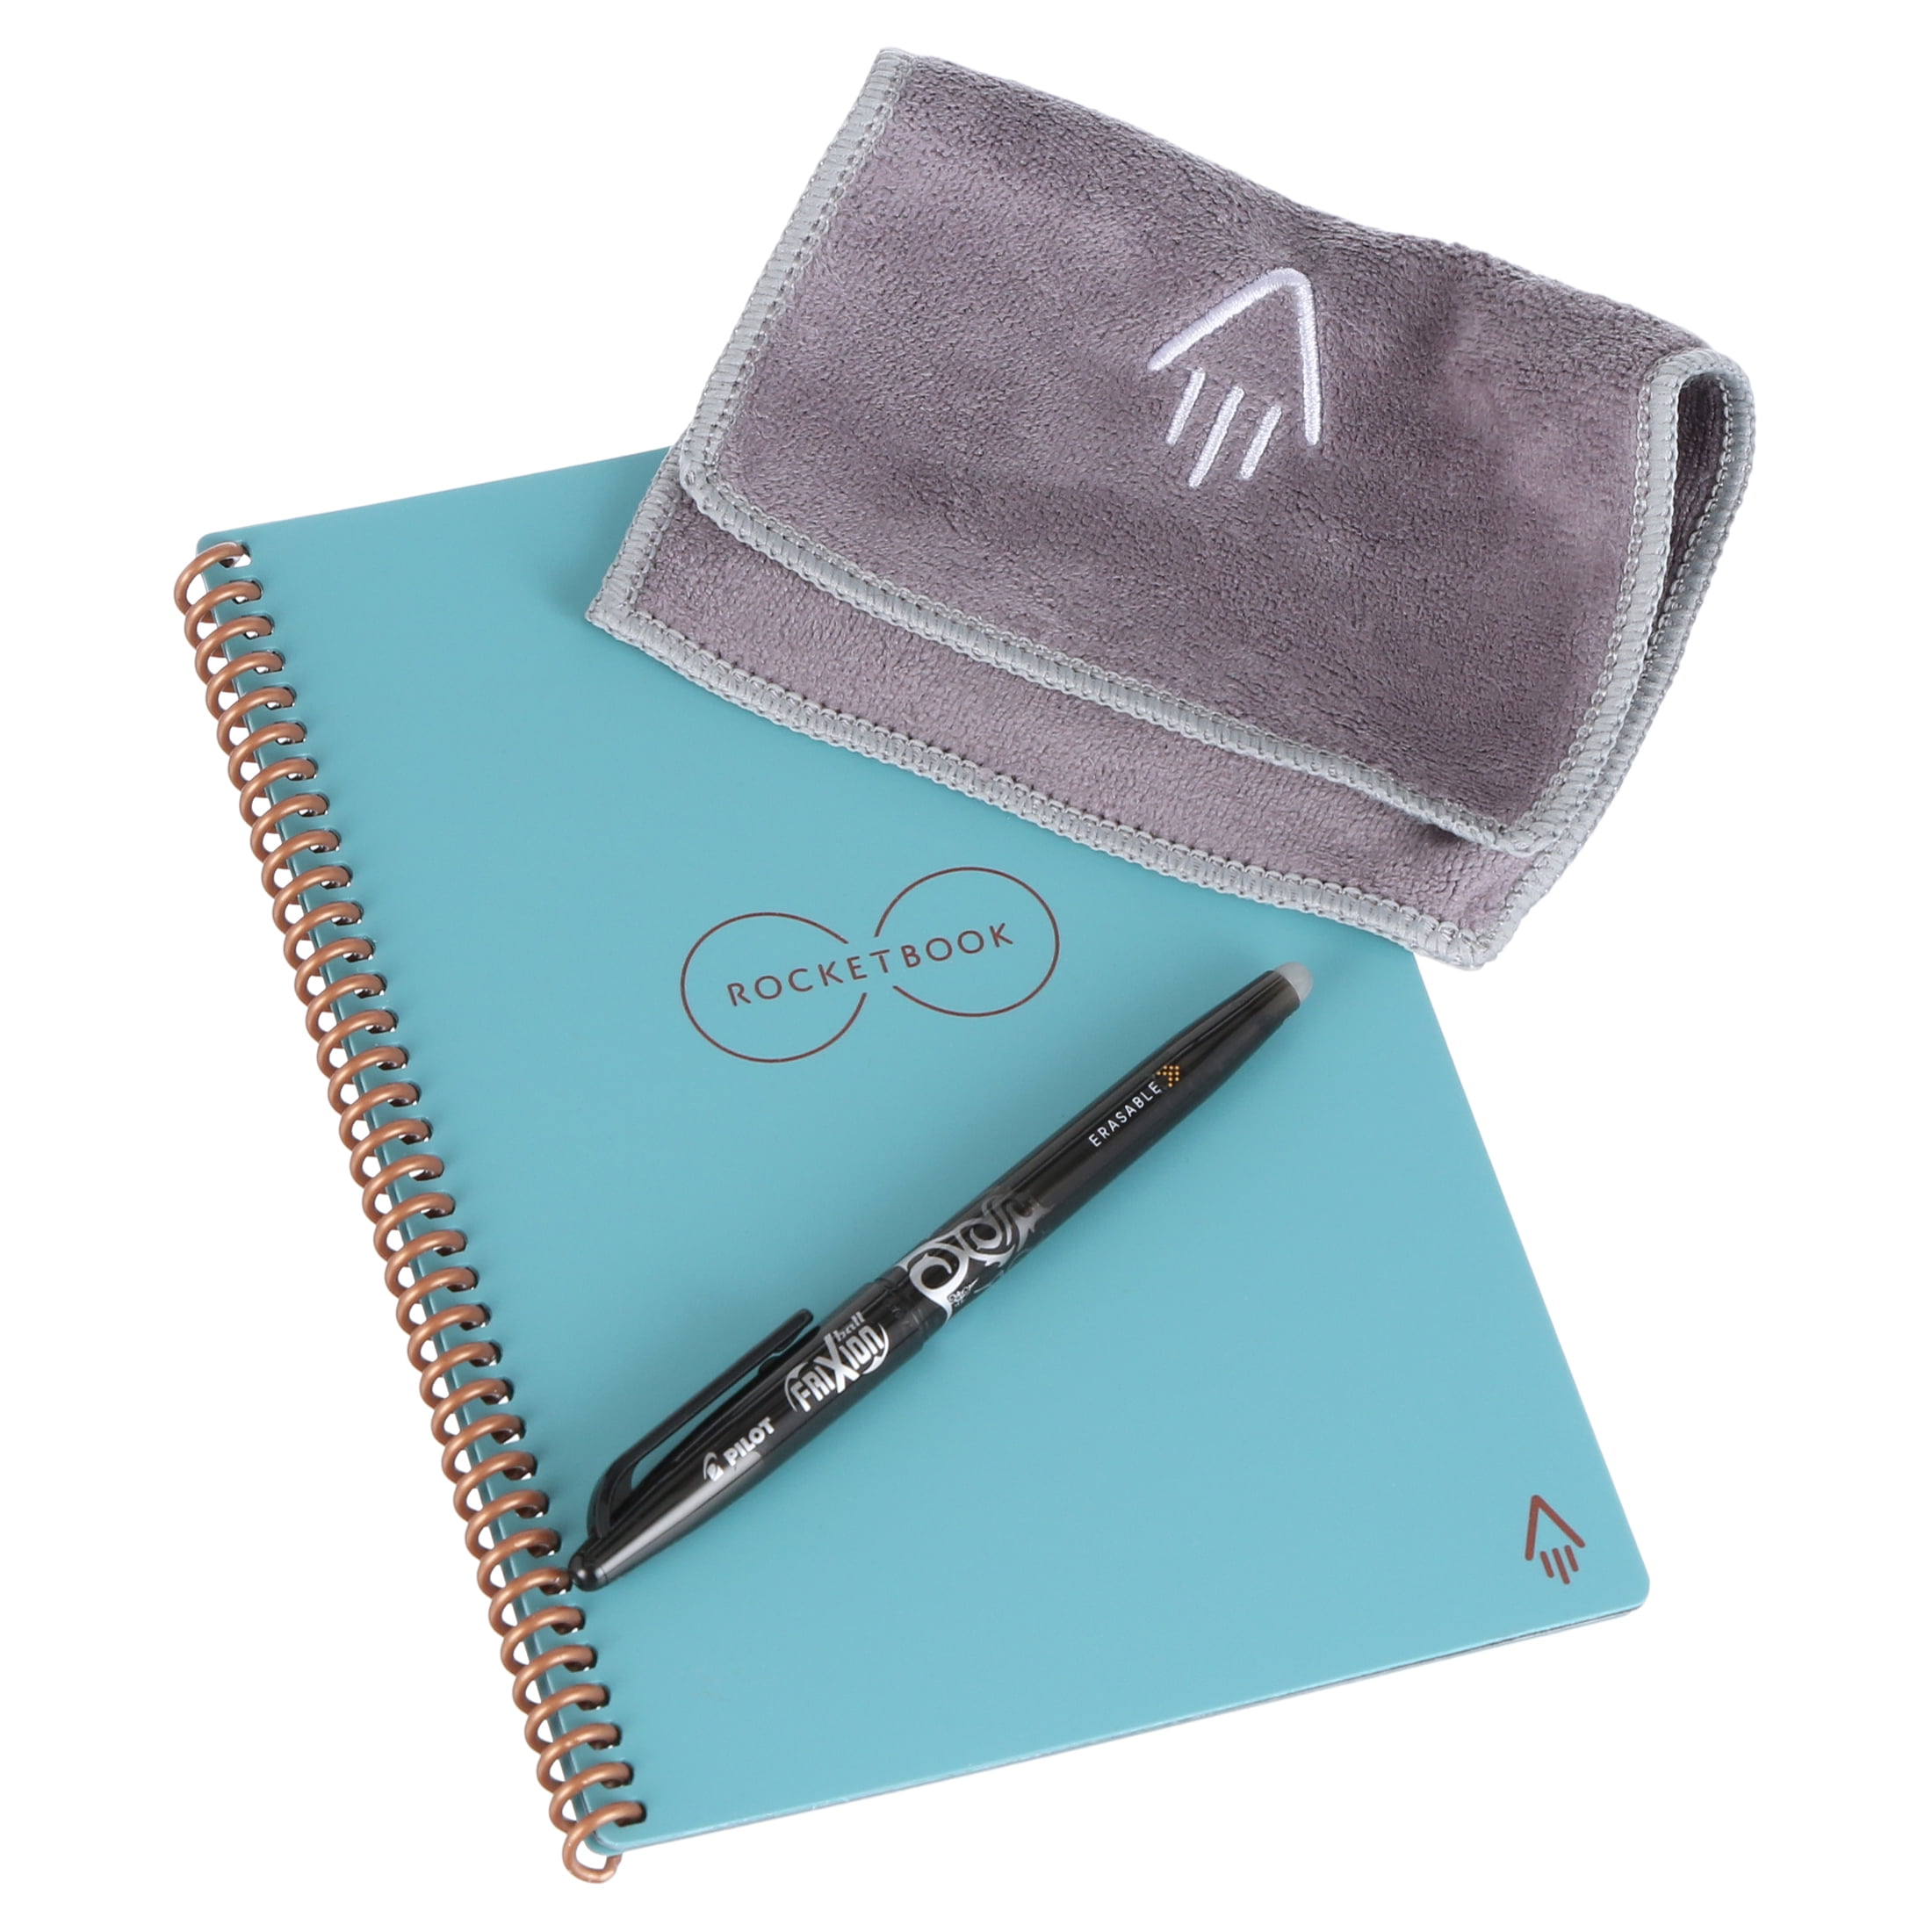 Lined Eco-Friendly Notebook with 1 Pilot Frixion Pen & 1 Microfiber Cloth Included 6 x 8.8 Executive Size Rocketbook Smart Reusable Notebook Neptune Teal Cover 